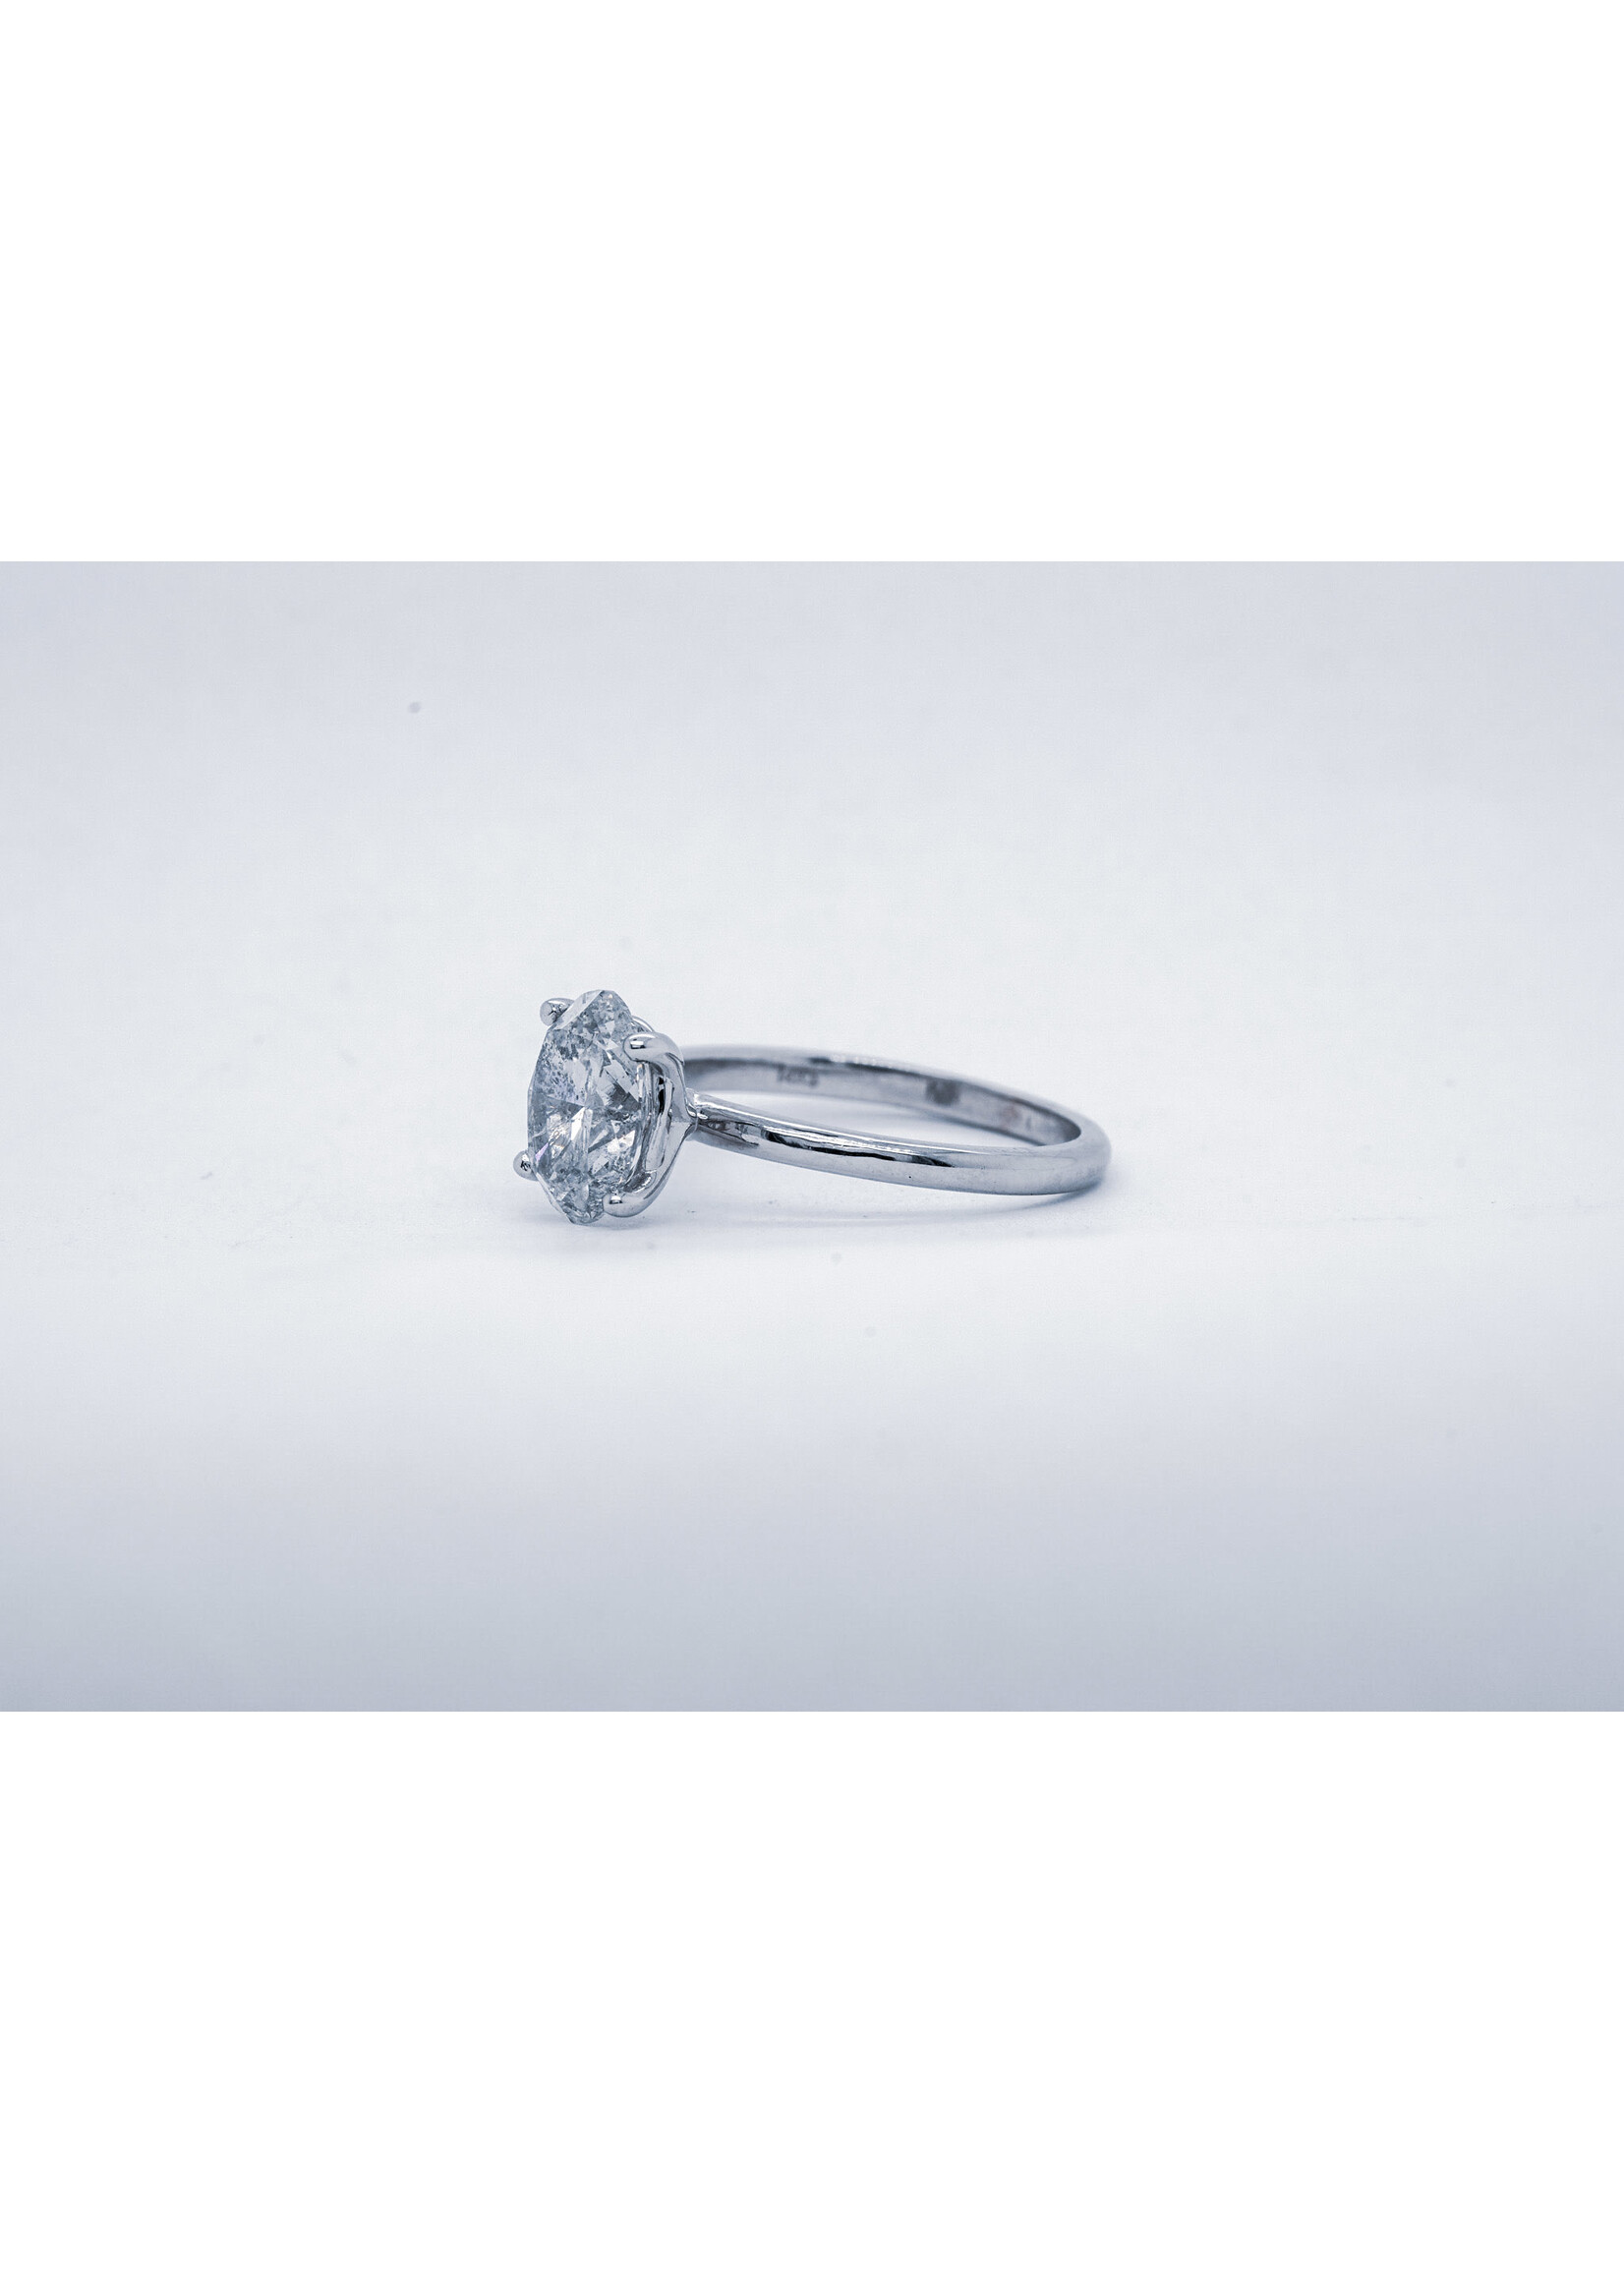 14KW 2.86g 2.00ct G/SI2 IGI Oval Diamond Solitaire Engagement Ring (size 6.75)